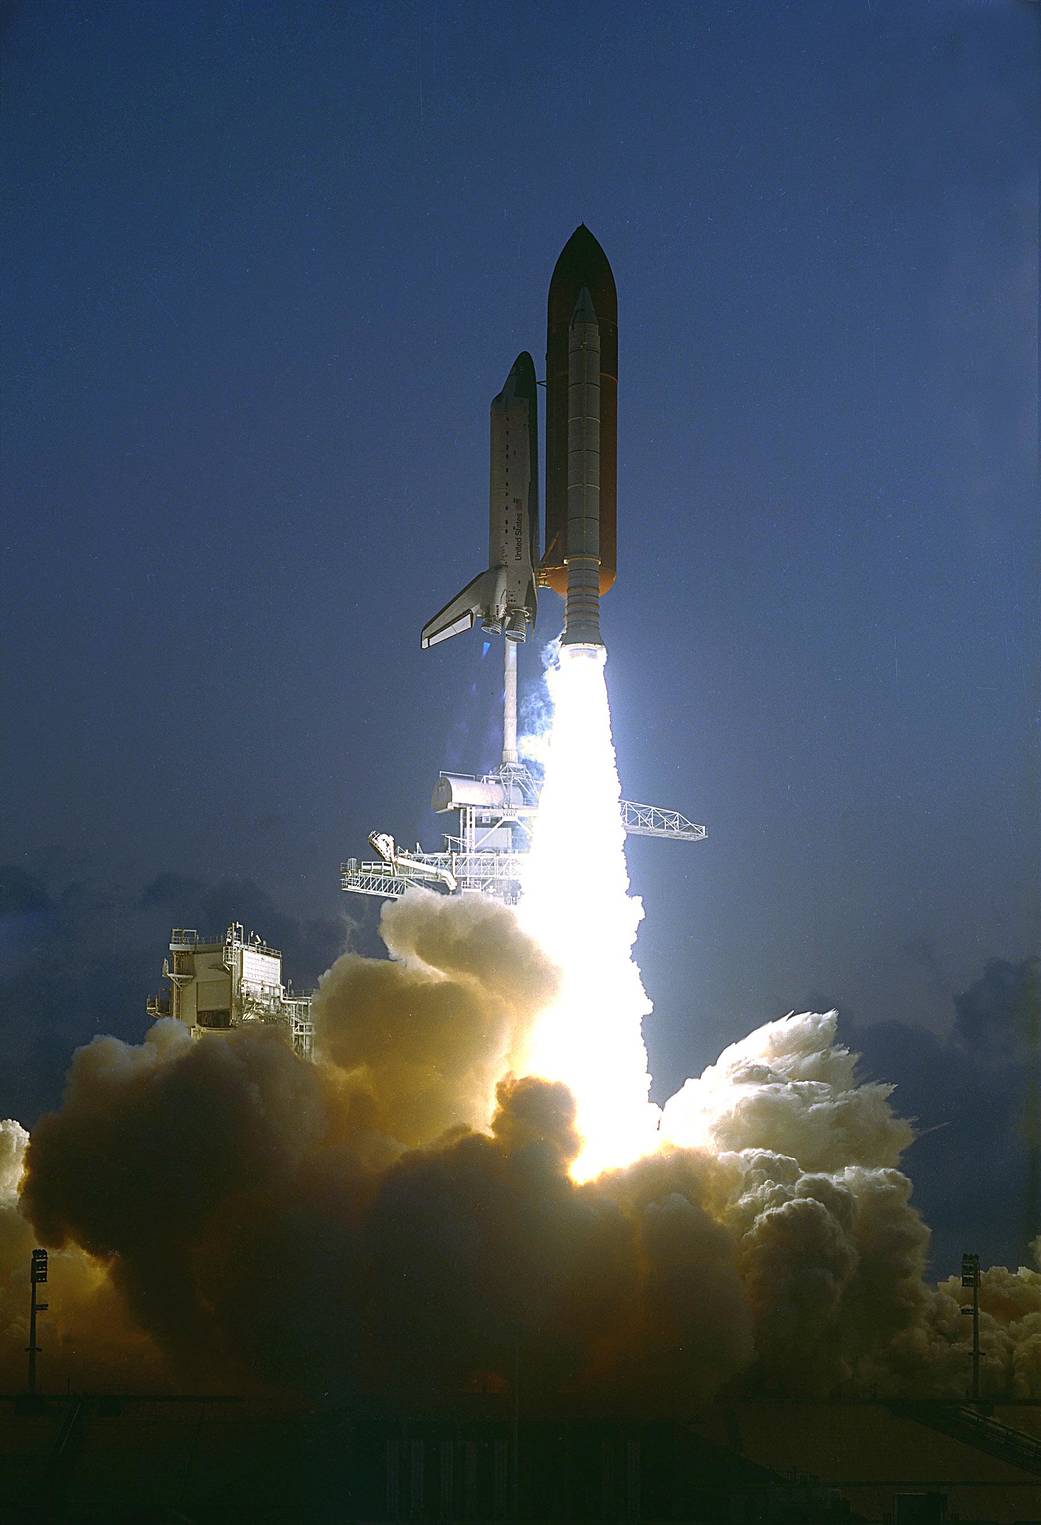 Space shuttle Endeavour lifts off for the first time on May 7, 1992, for the STS-49 mission.